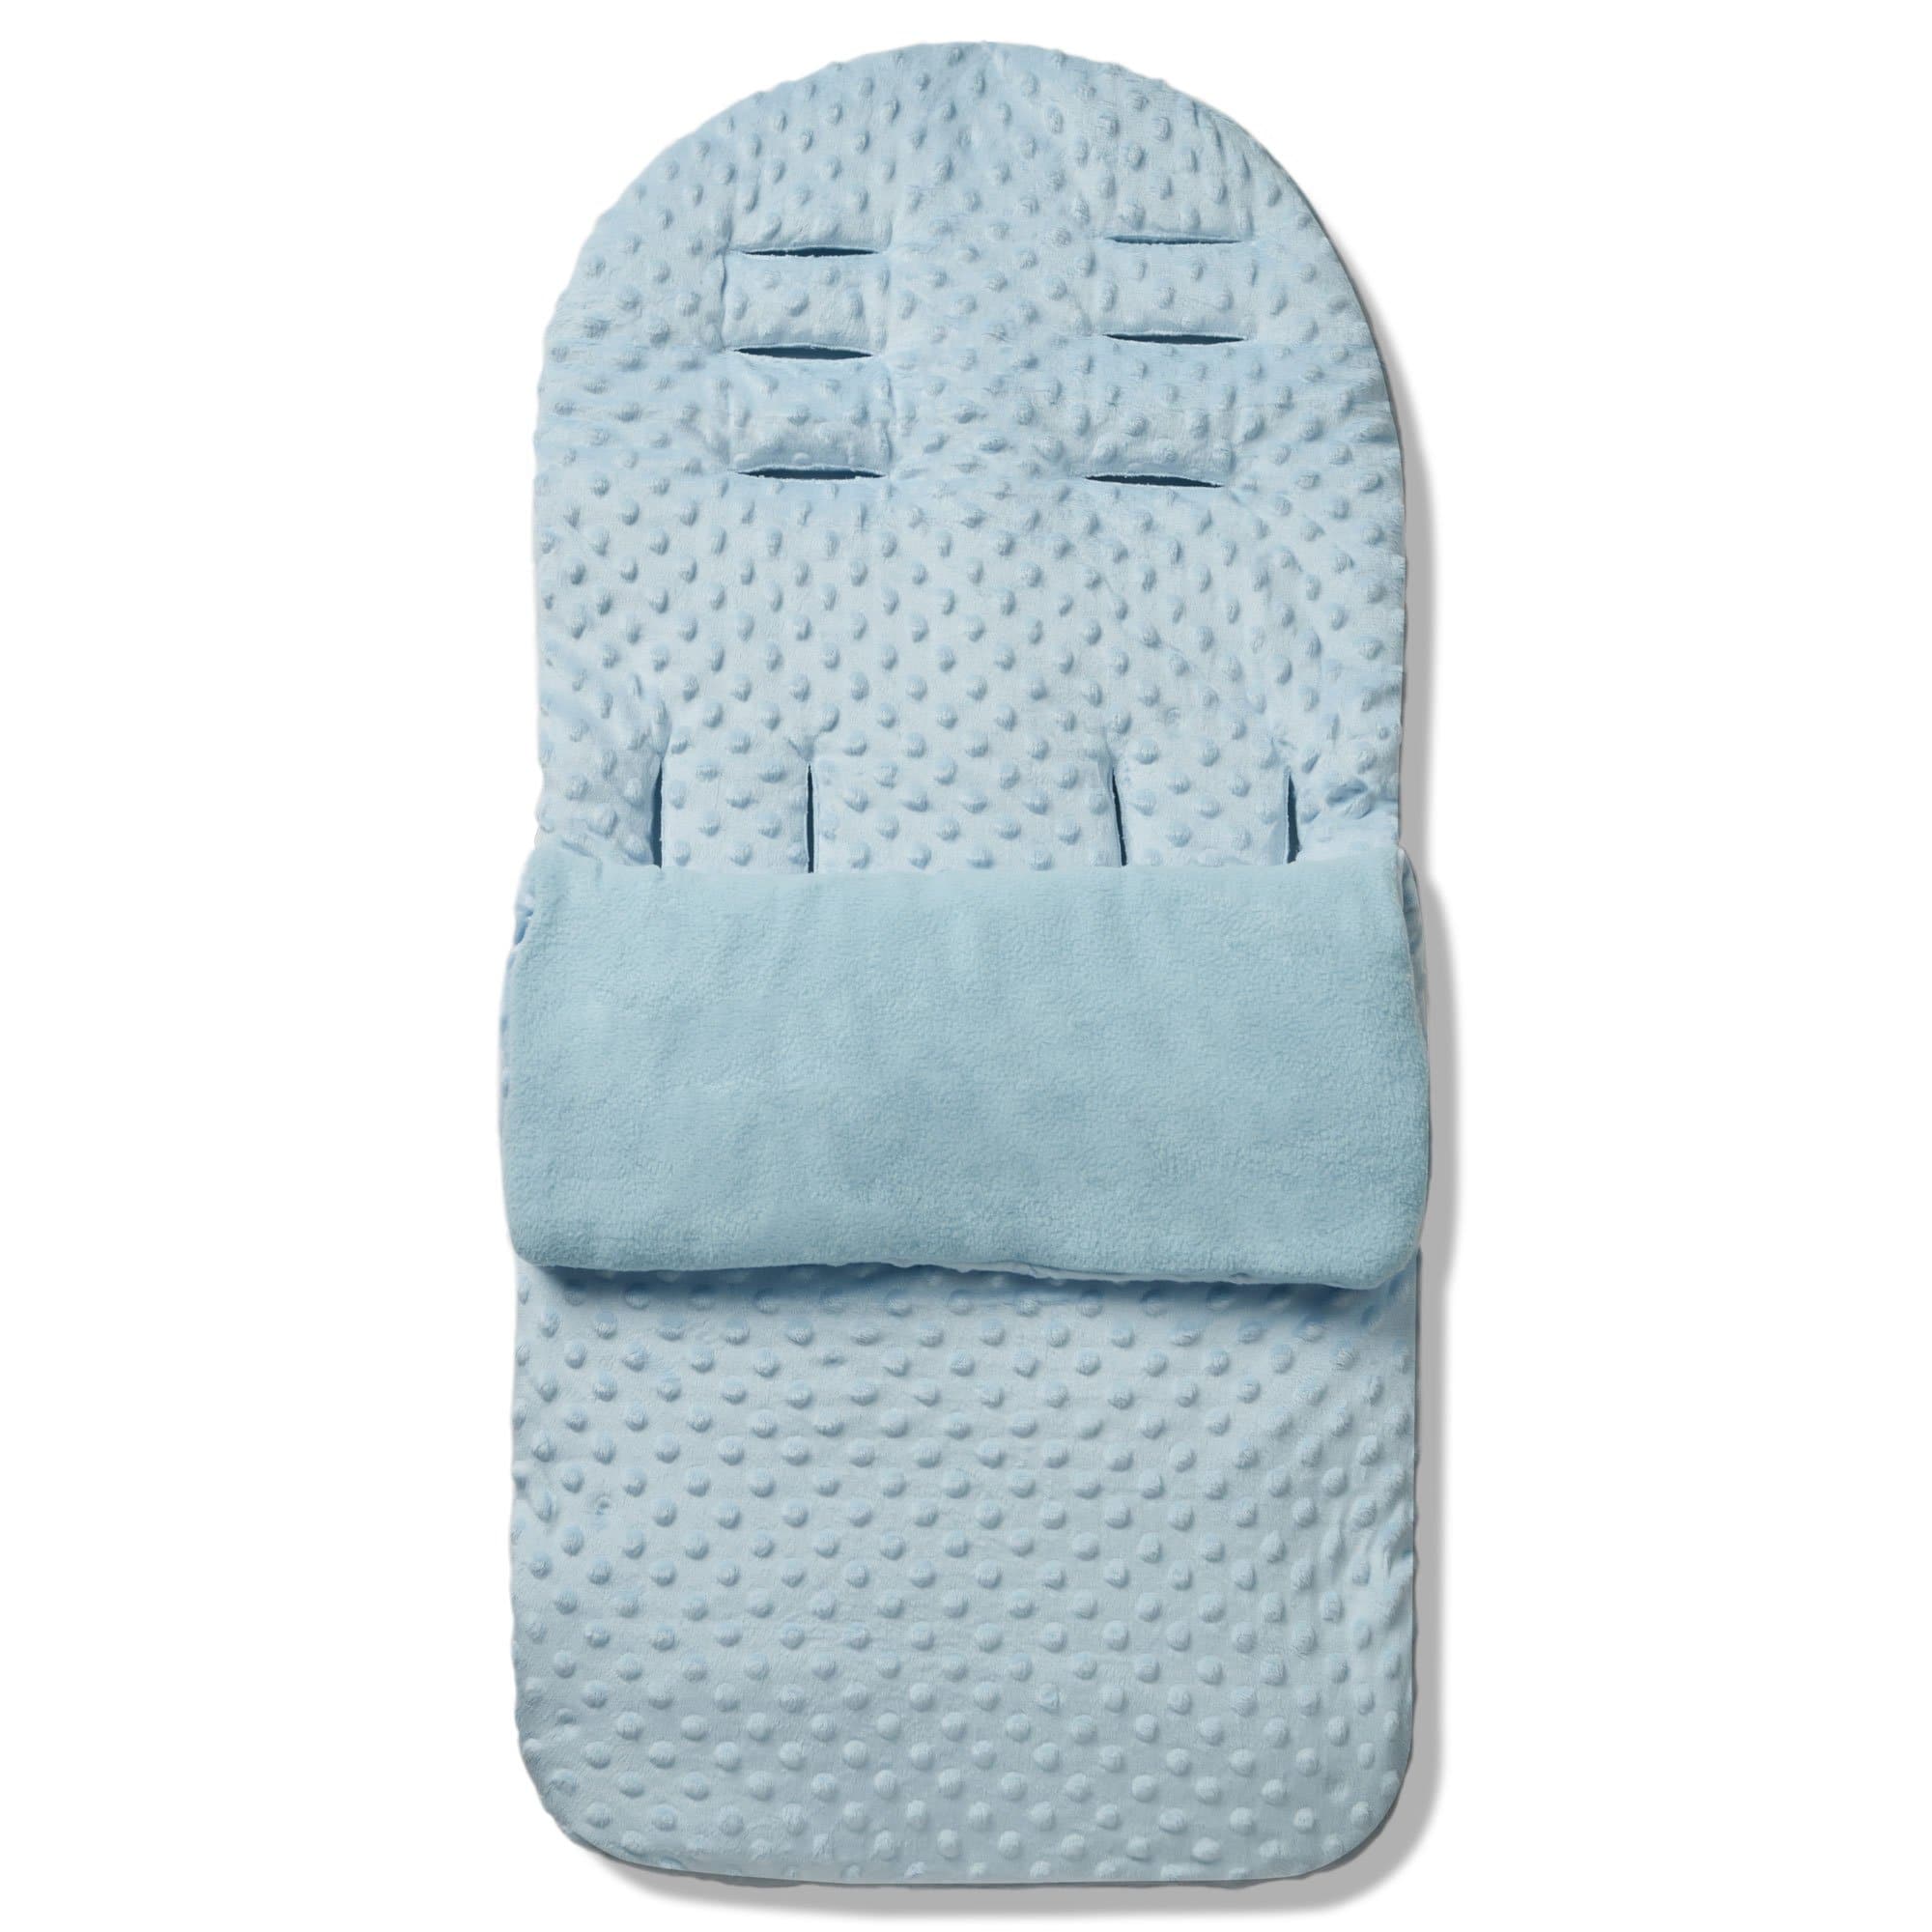 Dimple Footmuff / Cosy Toes Compatible with Bebe 9 - Blue / Fits All Models | For Your Little One